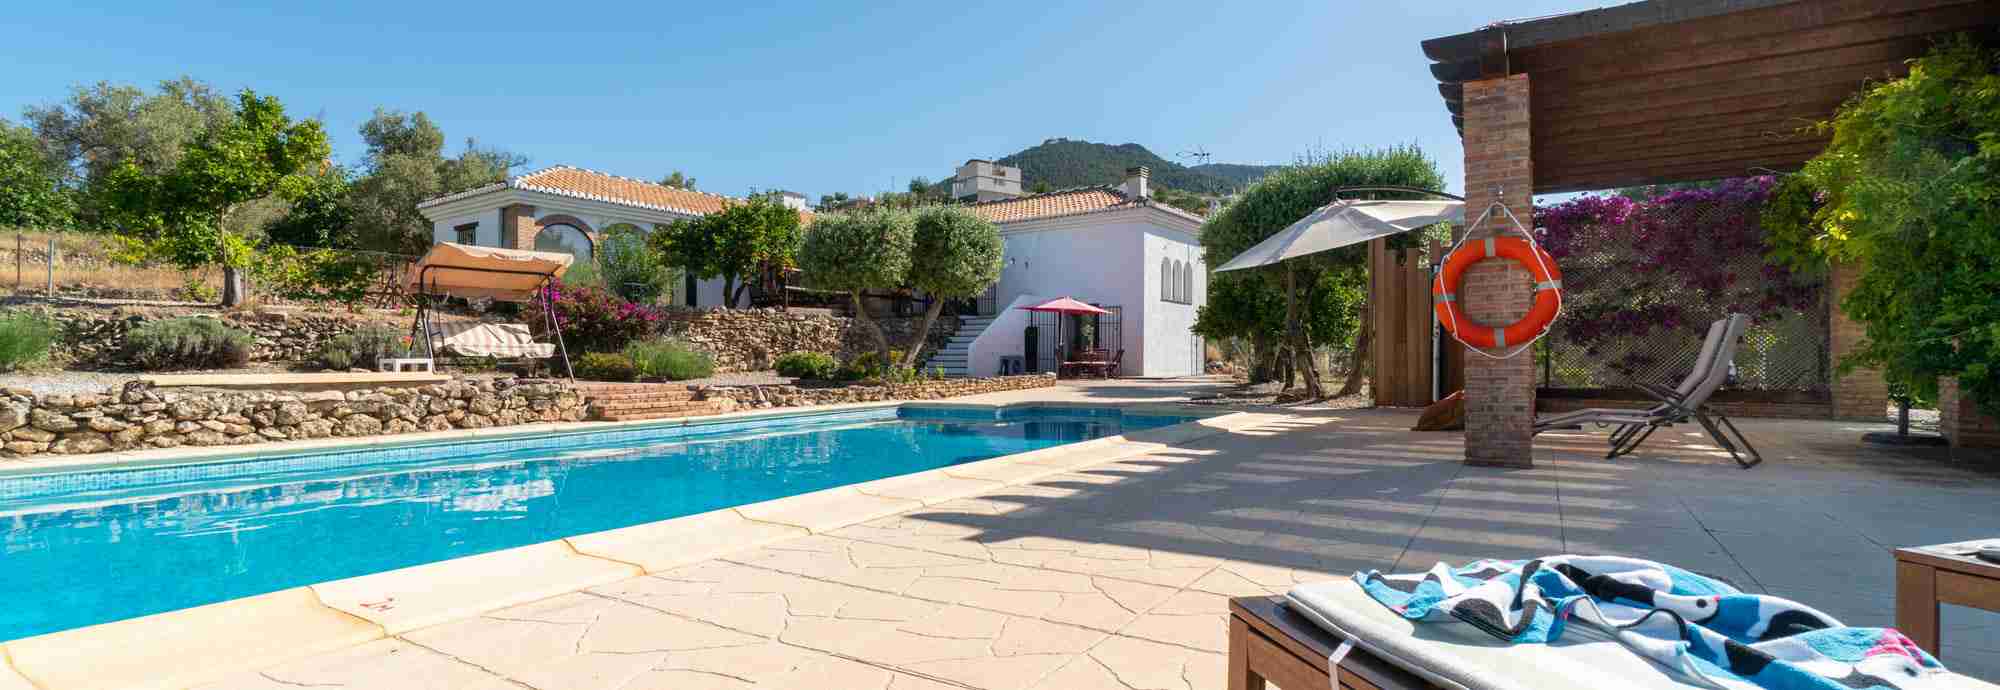 Andalusian villa with 10 metre heatable pool close to Granada and beaches